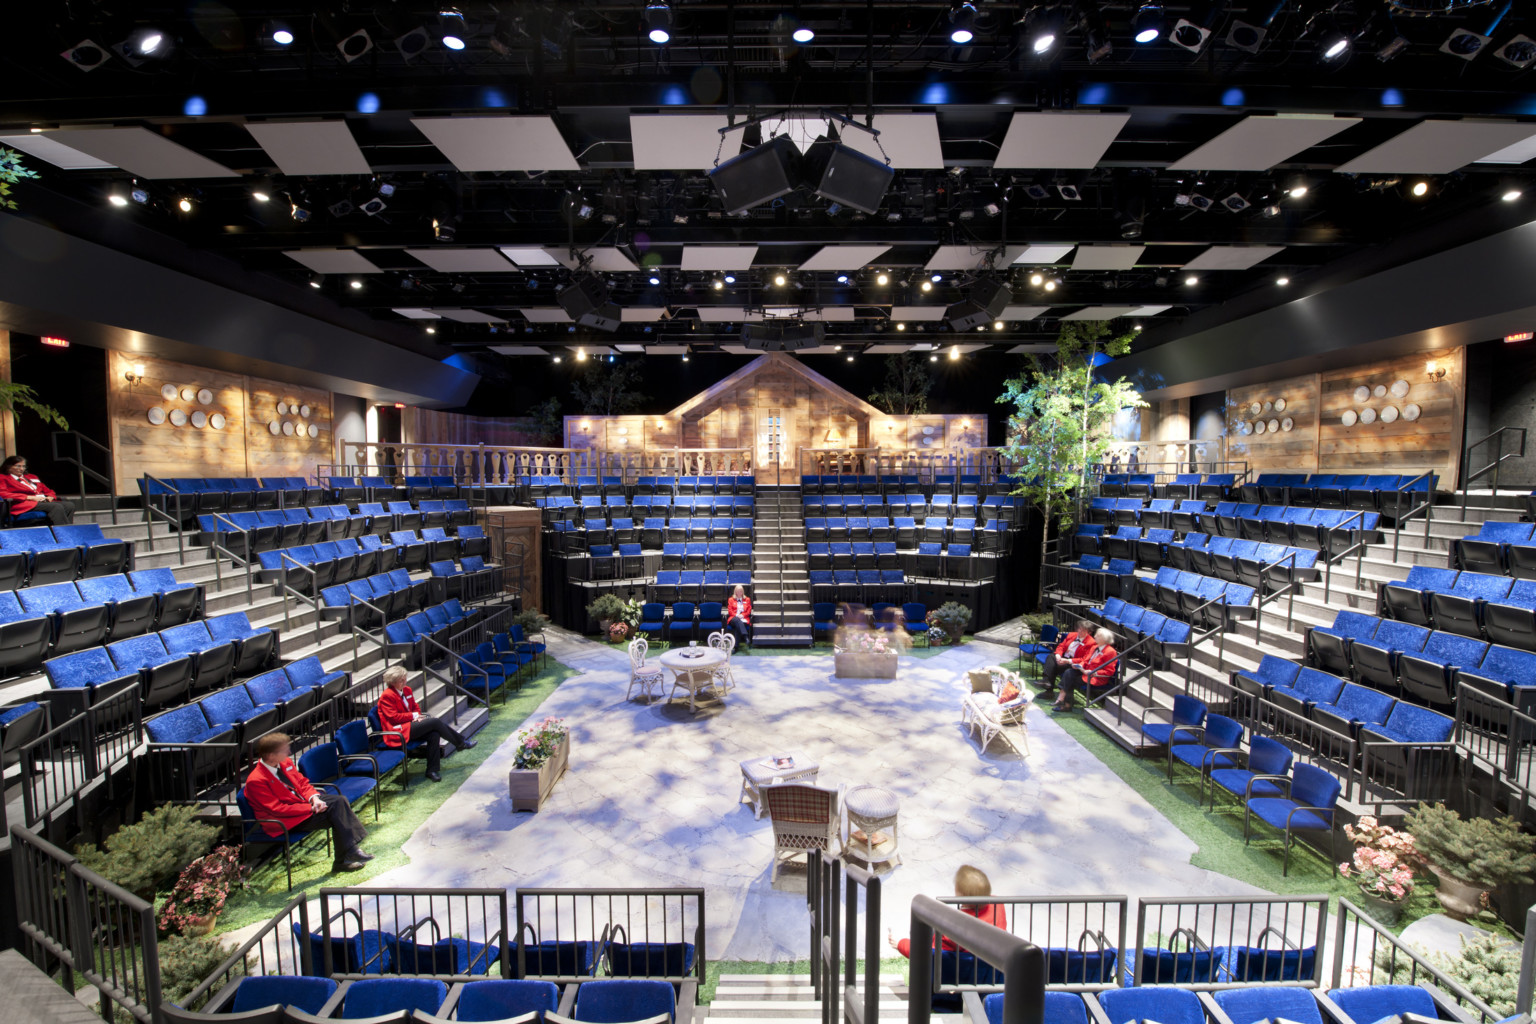 blackbox theater in the round with 360 degree seating around a stage set with tables and chairs, plants at edges